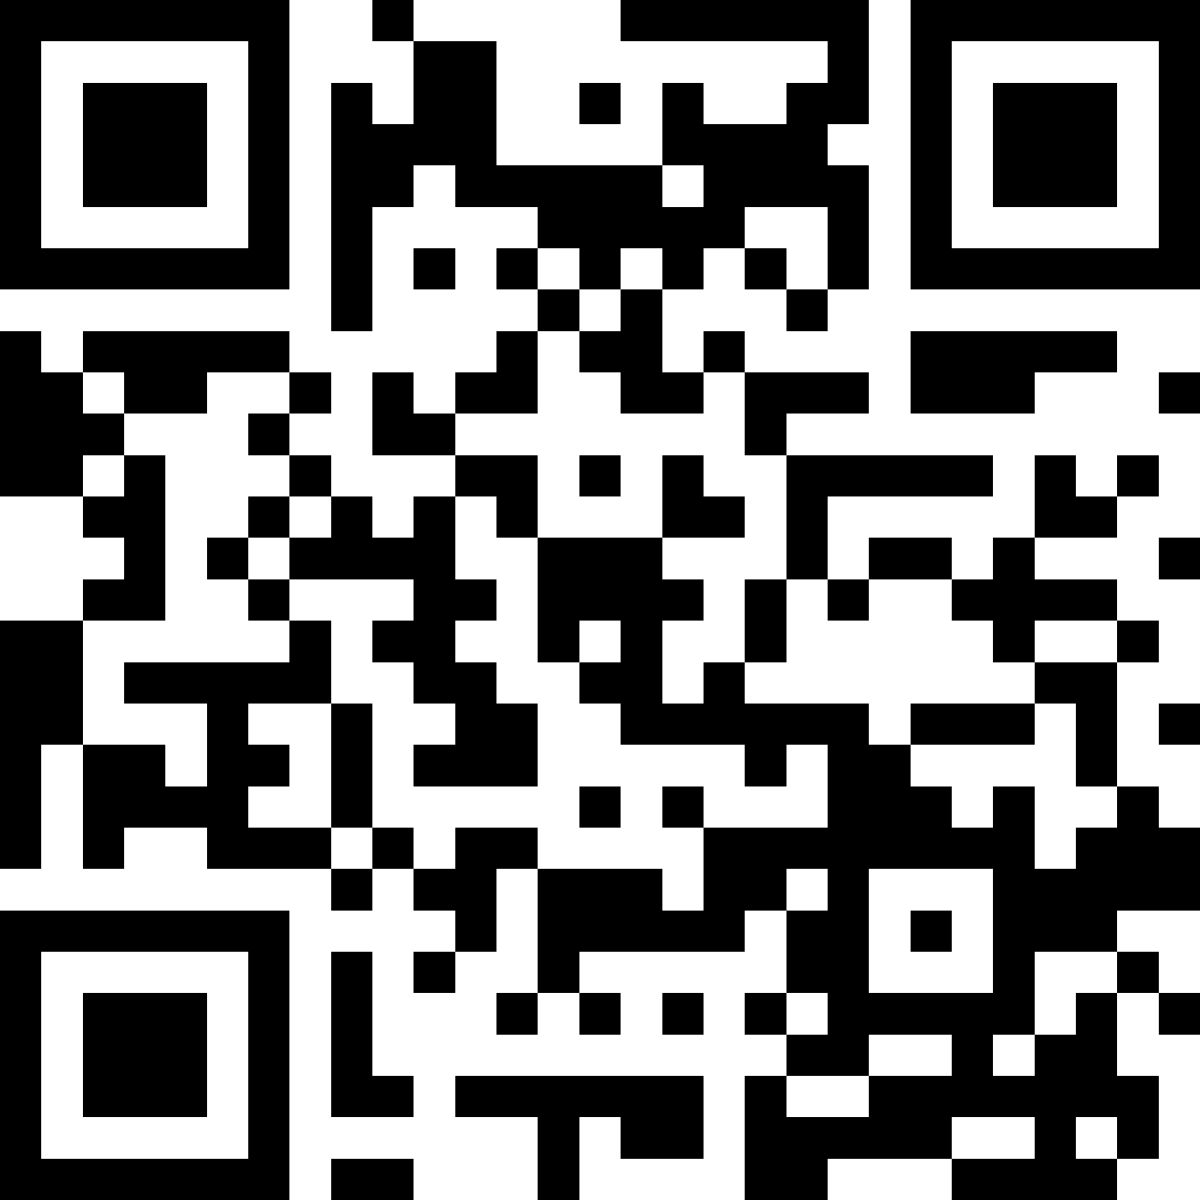 Scan QR code to request medical records